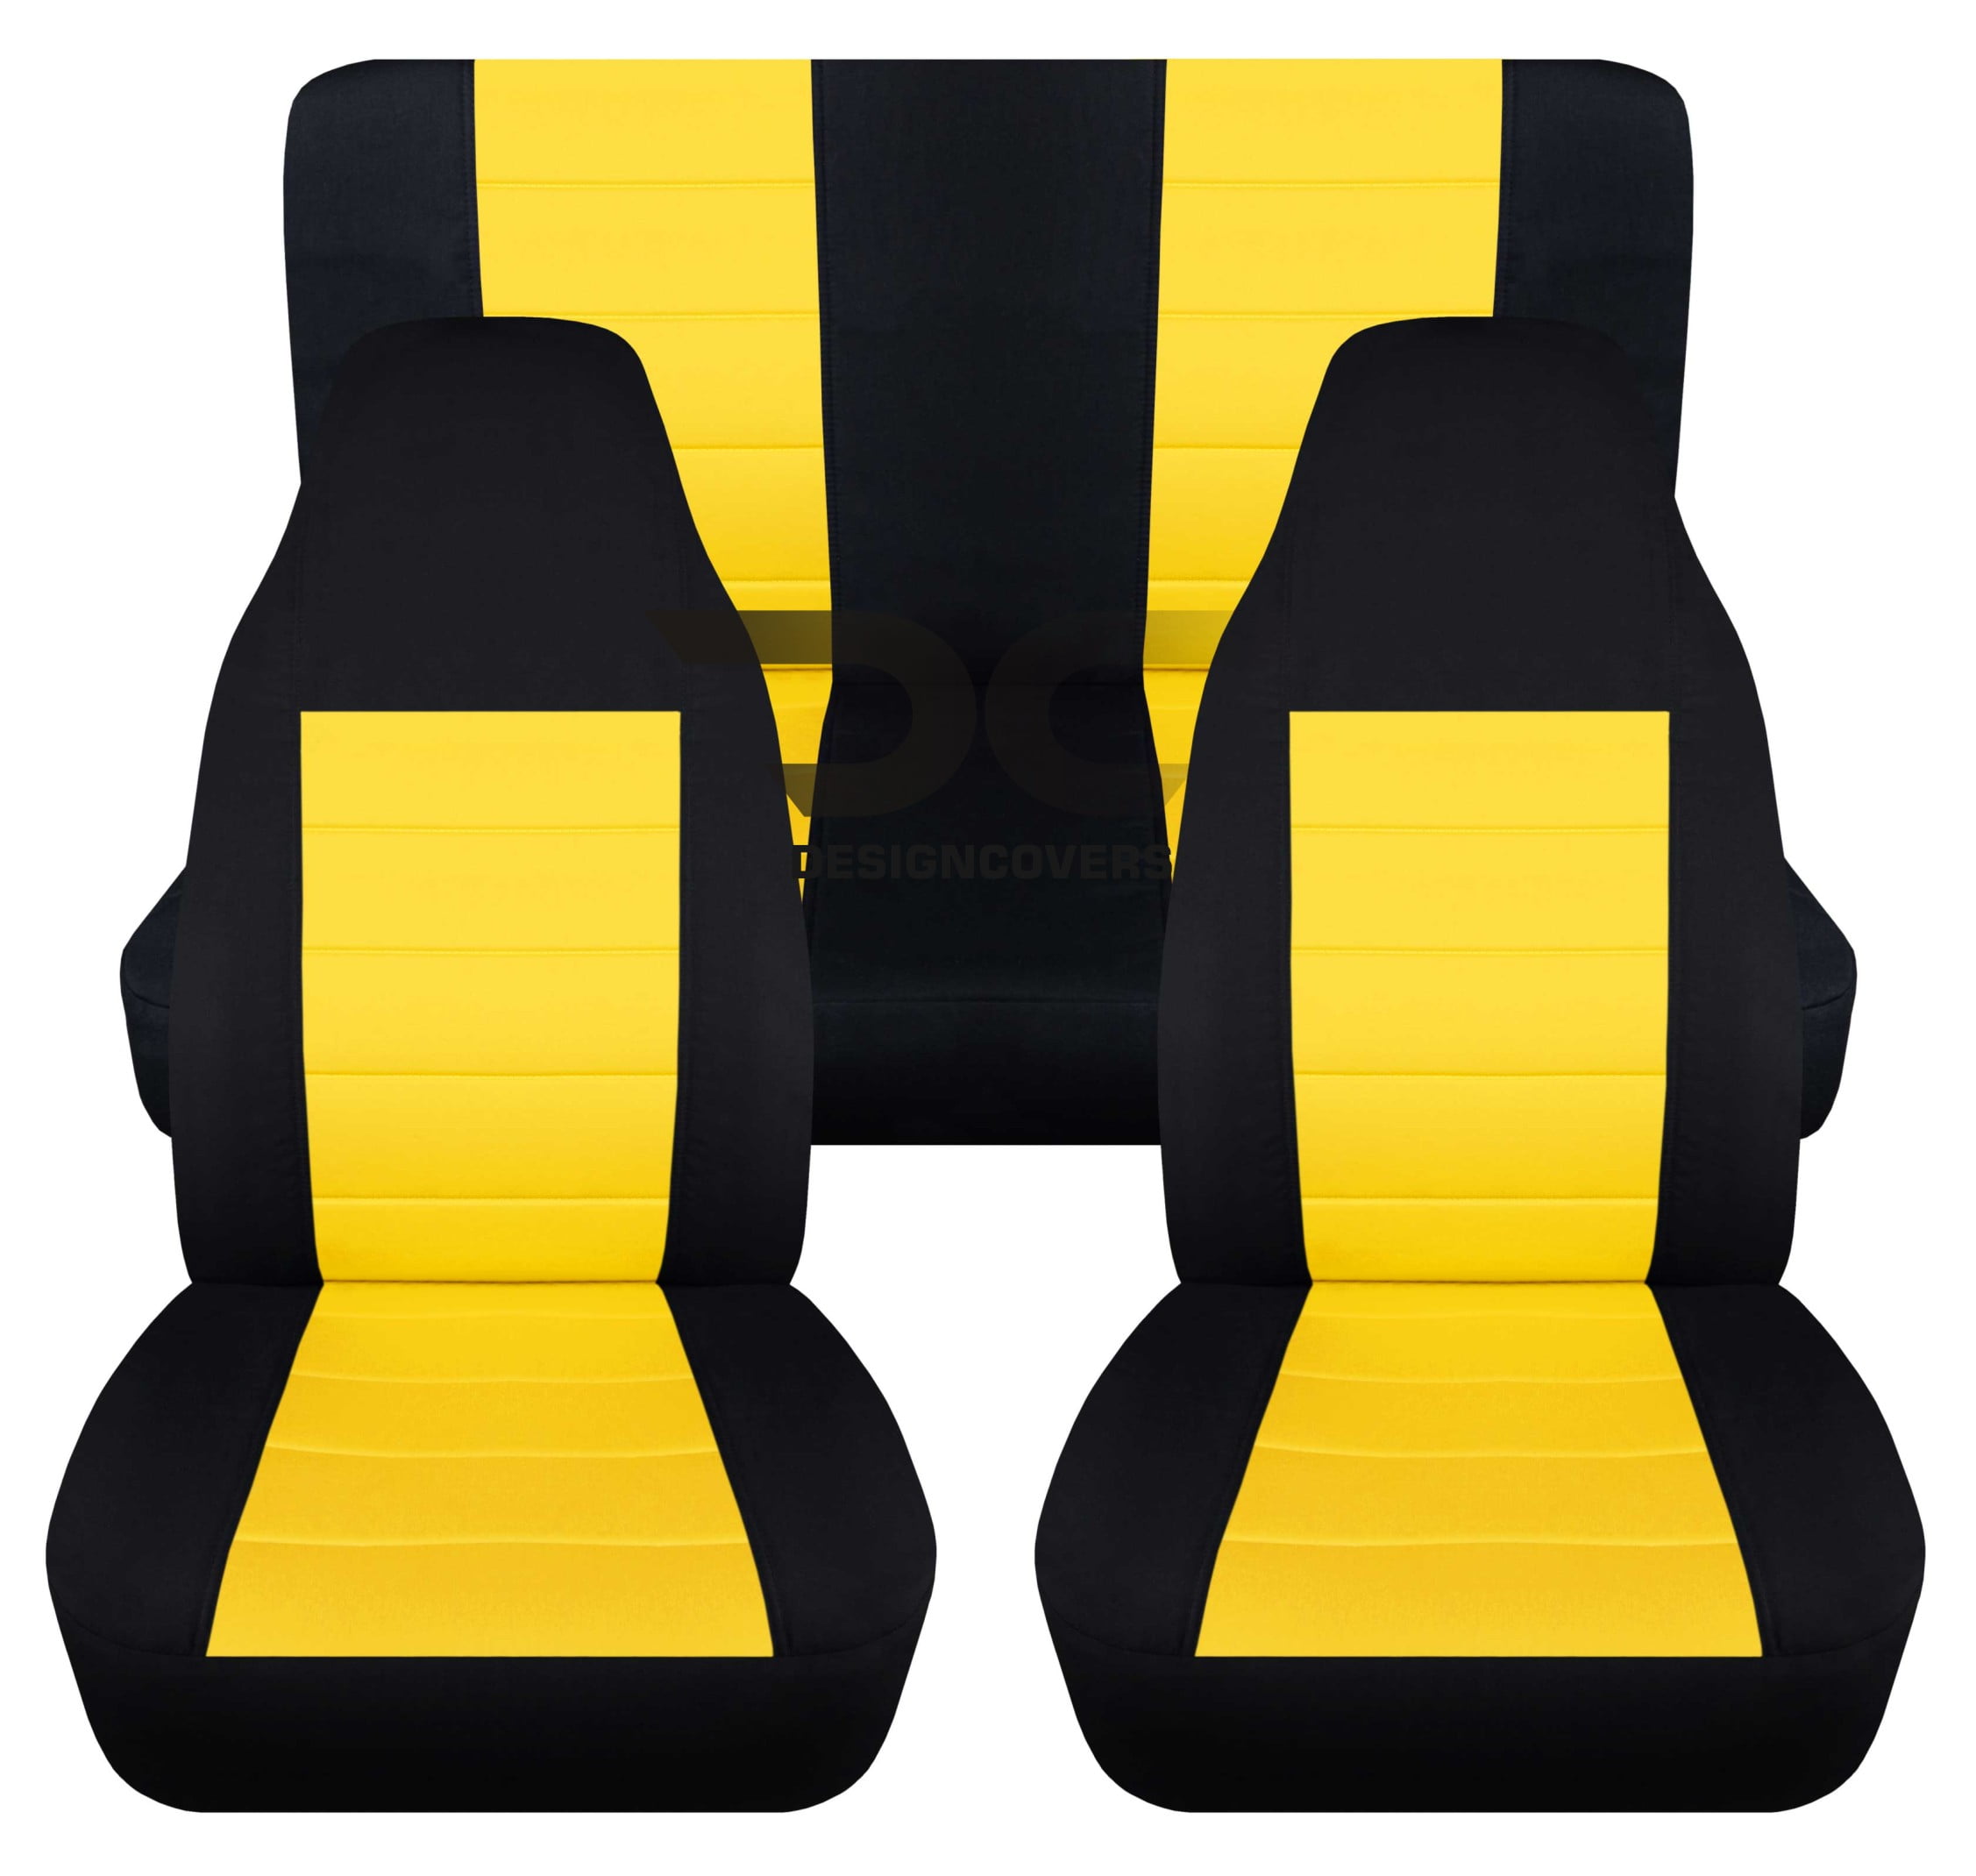 T188-Designcovers Compatible with 1987-1995 Jeep Wrangler YJ 2door Seat  Covers:Black and yellow - Full Set 